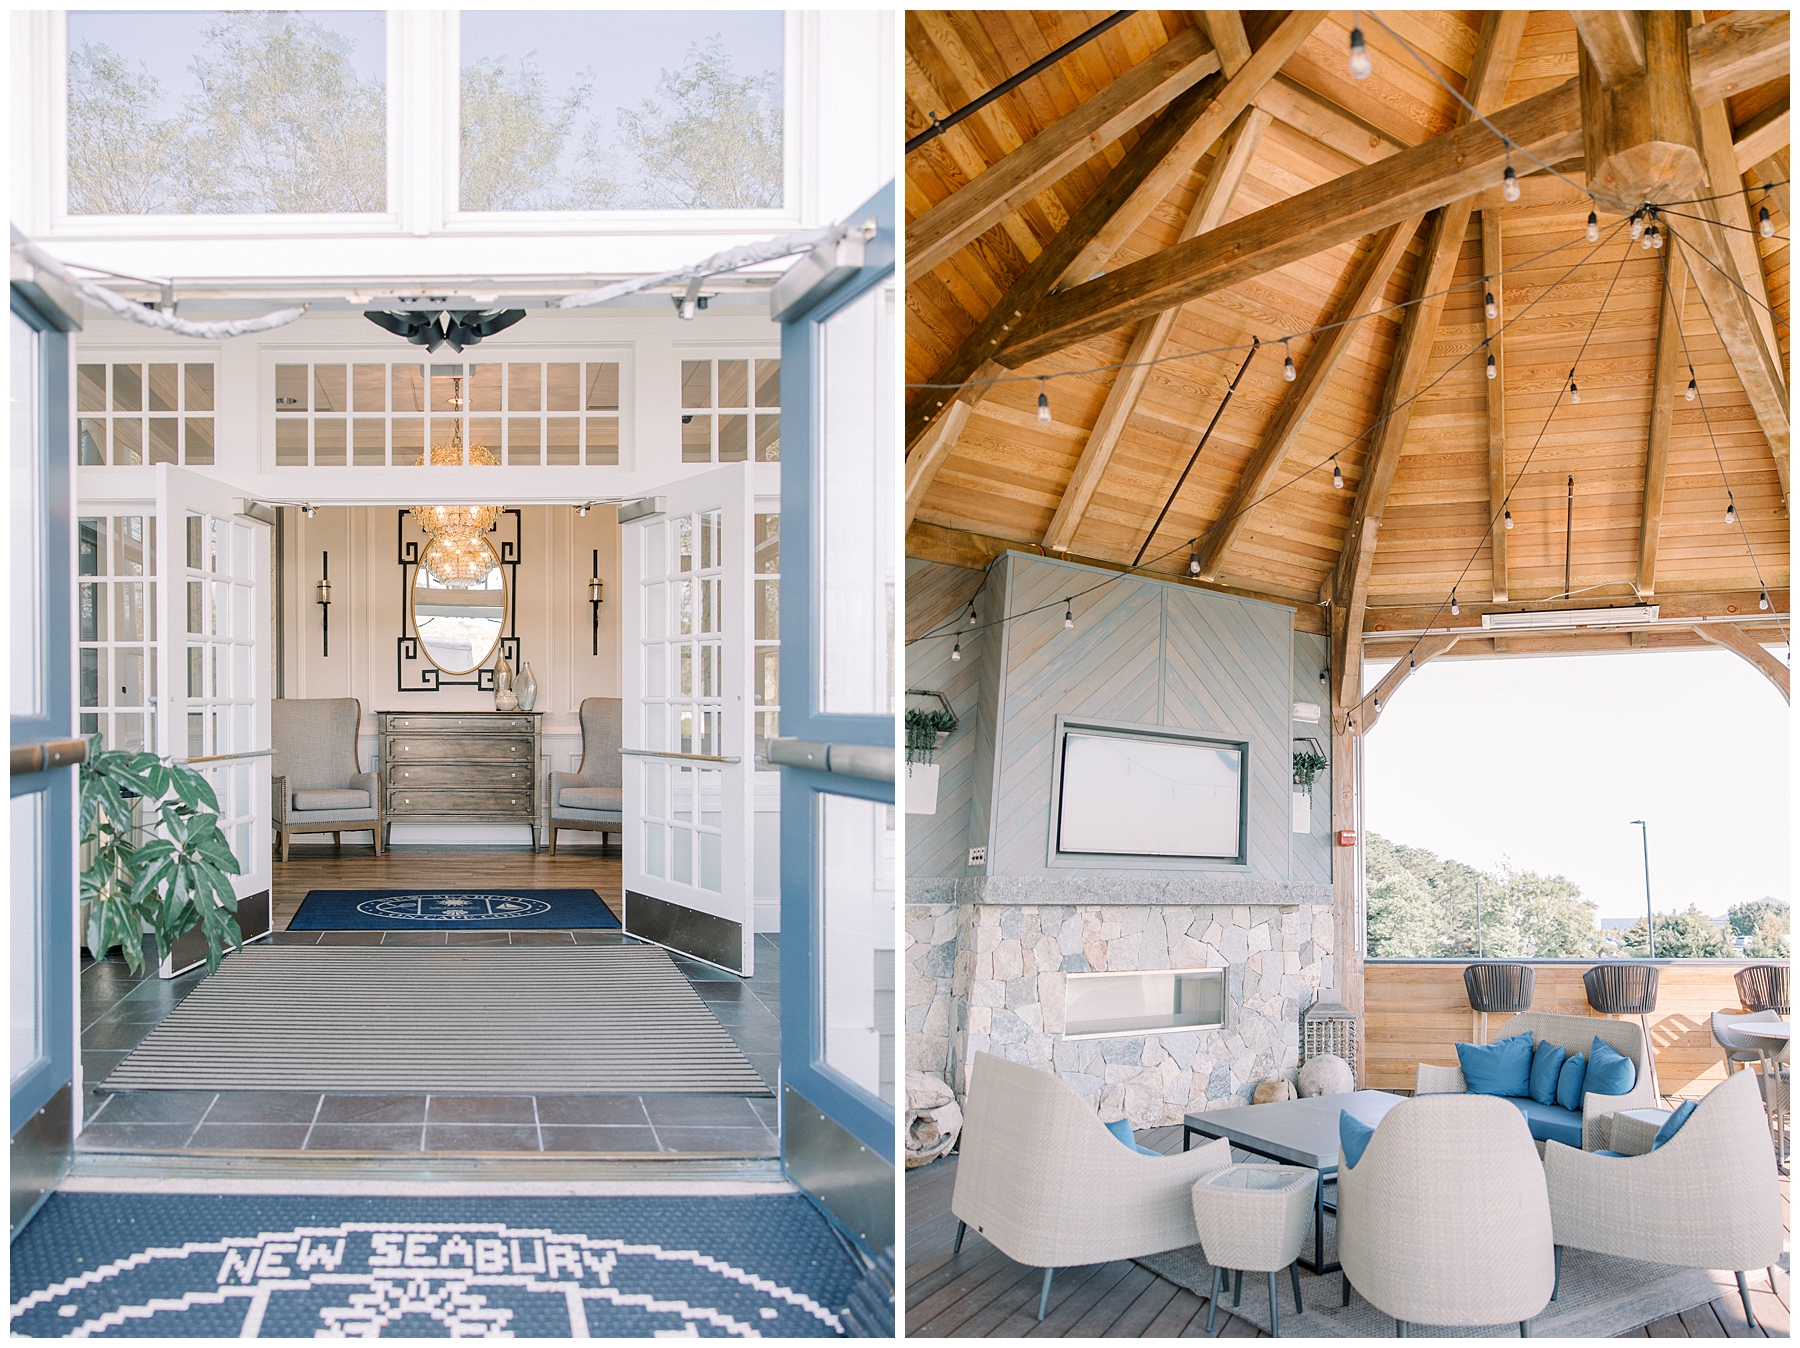 indoor and outdoor views of the Club at New Seabury